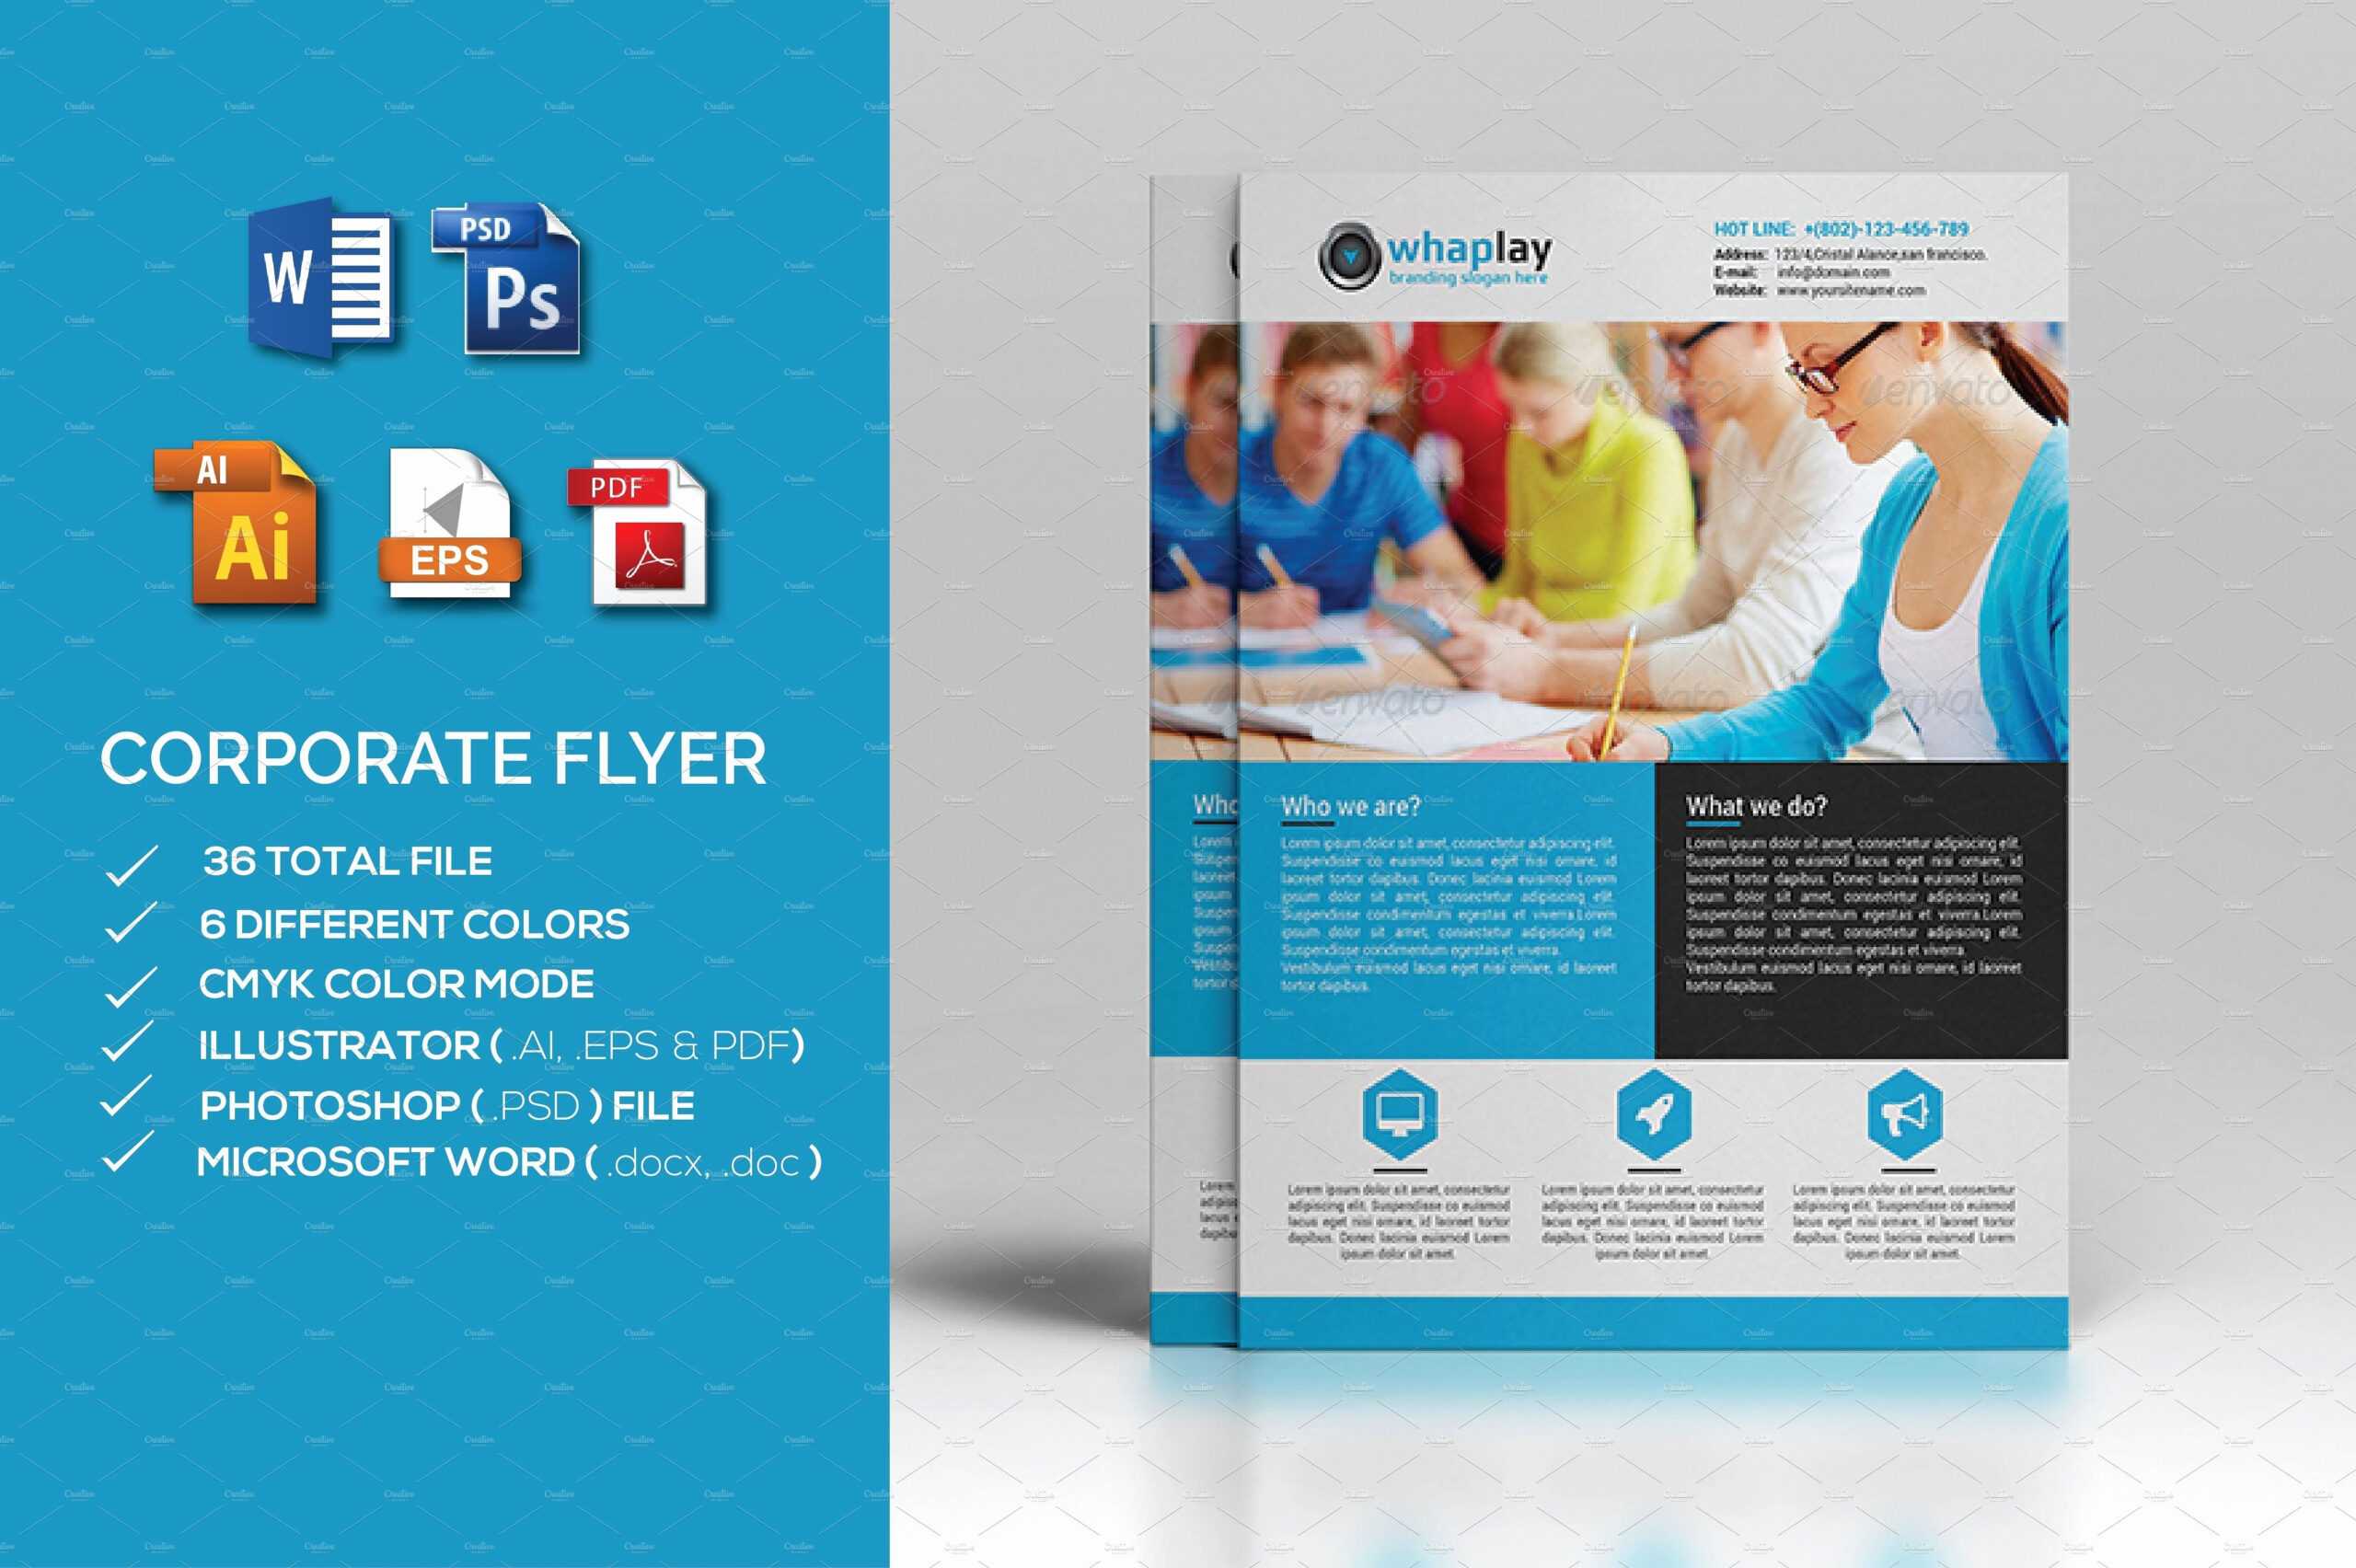 031 Free Business Flyer Templates Microsoft Word Luxury For With Regard To Free Business Flyer Templates For Microsoft Word